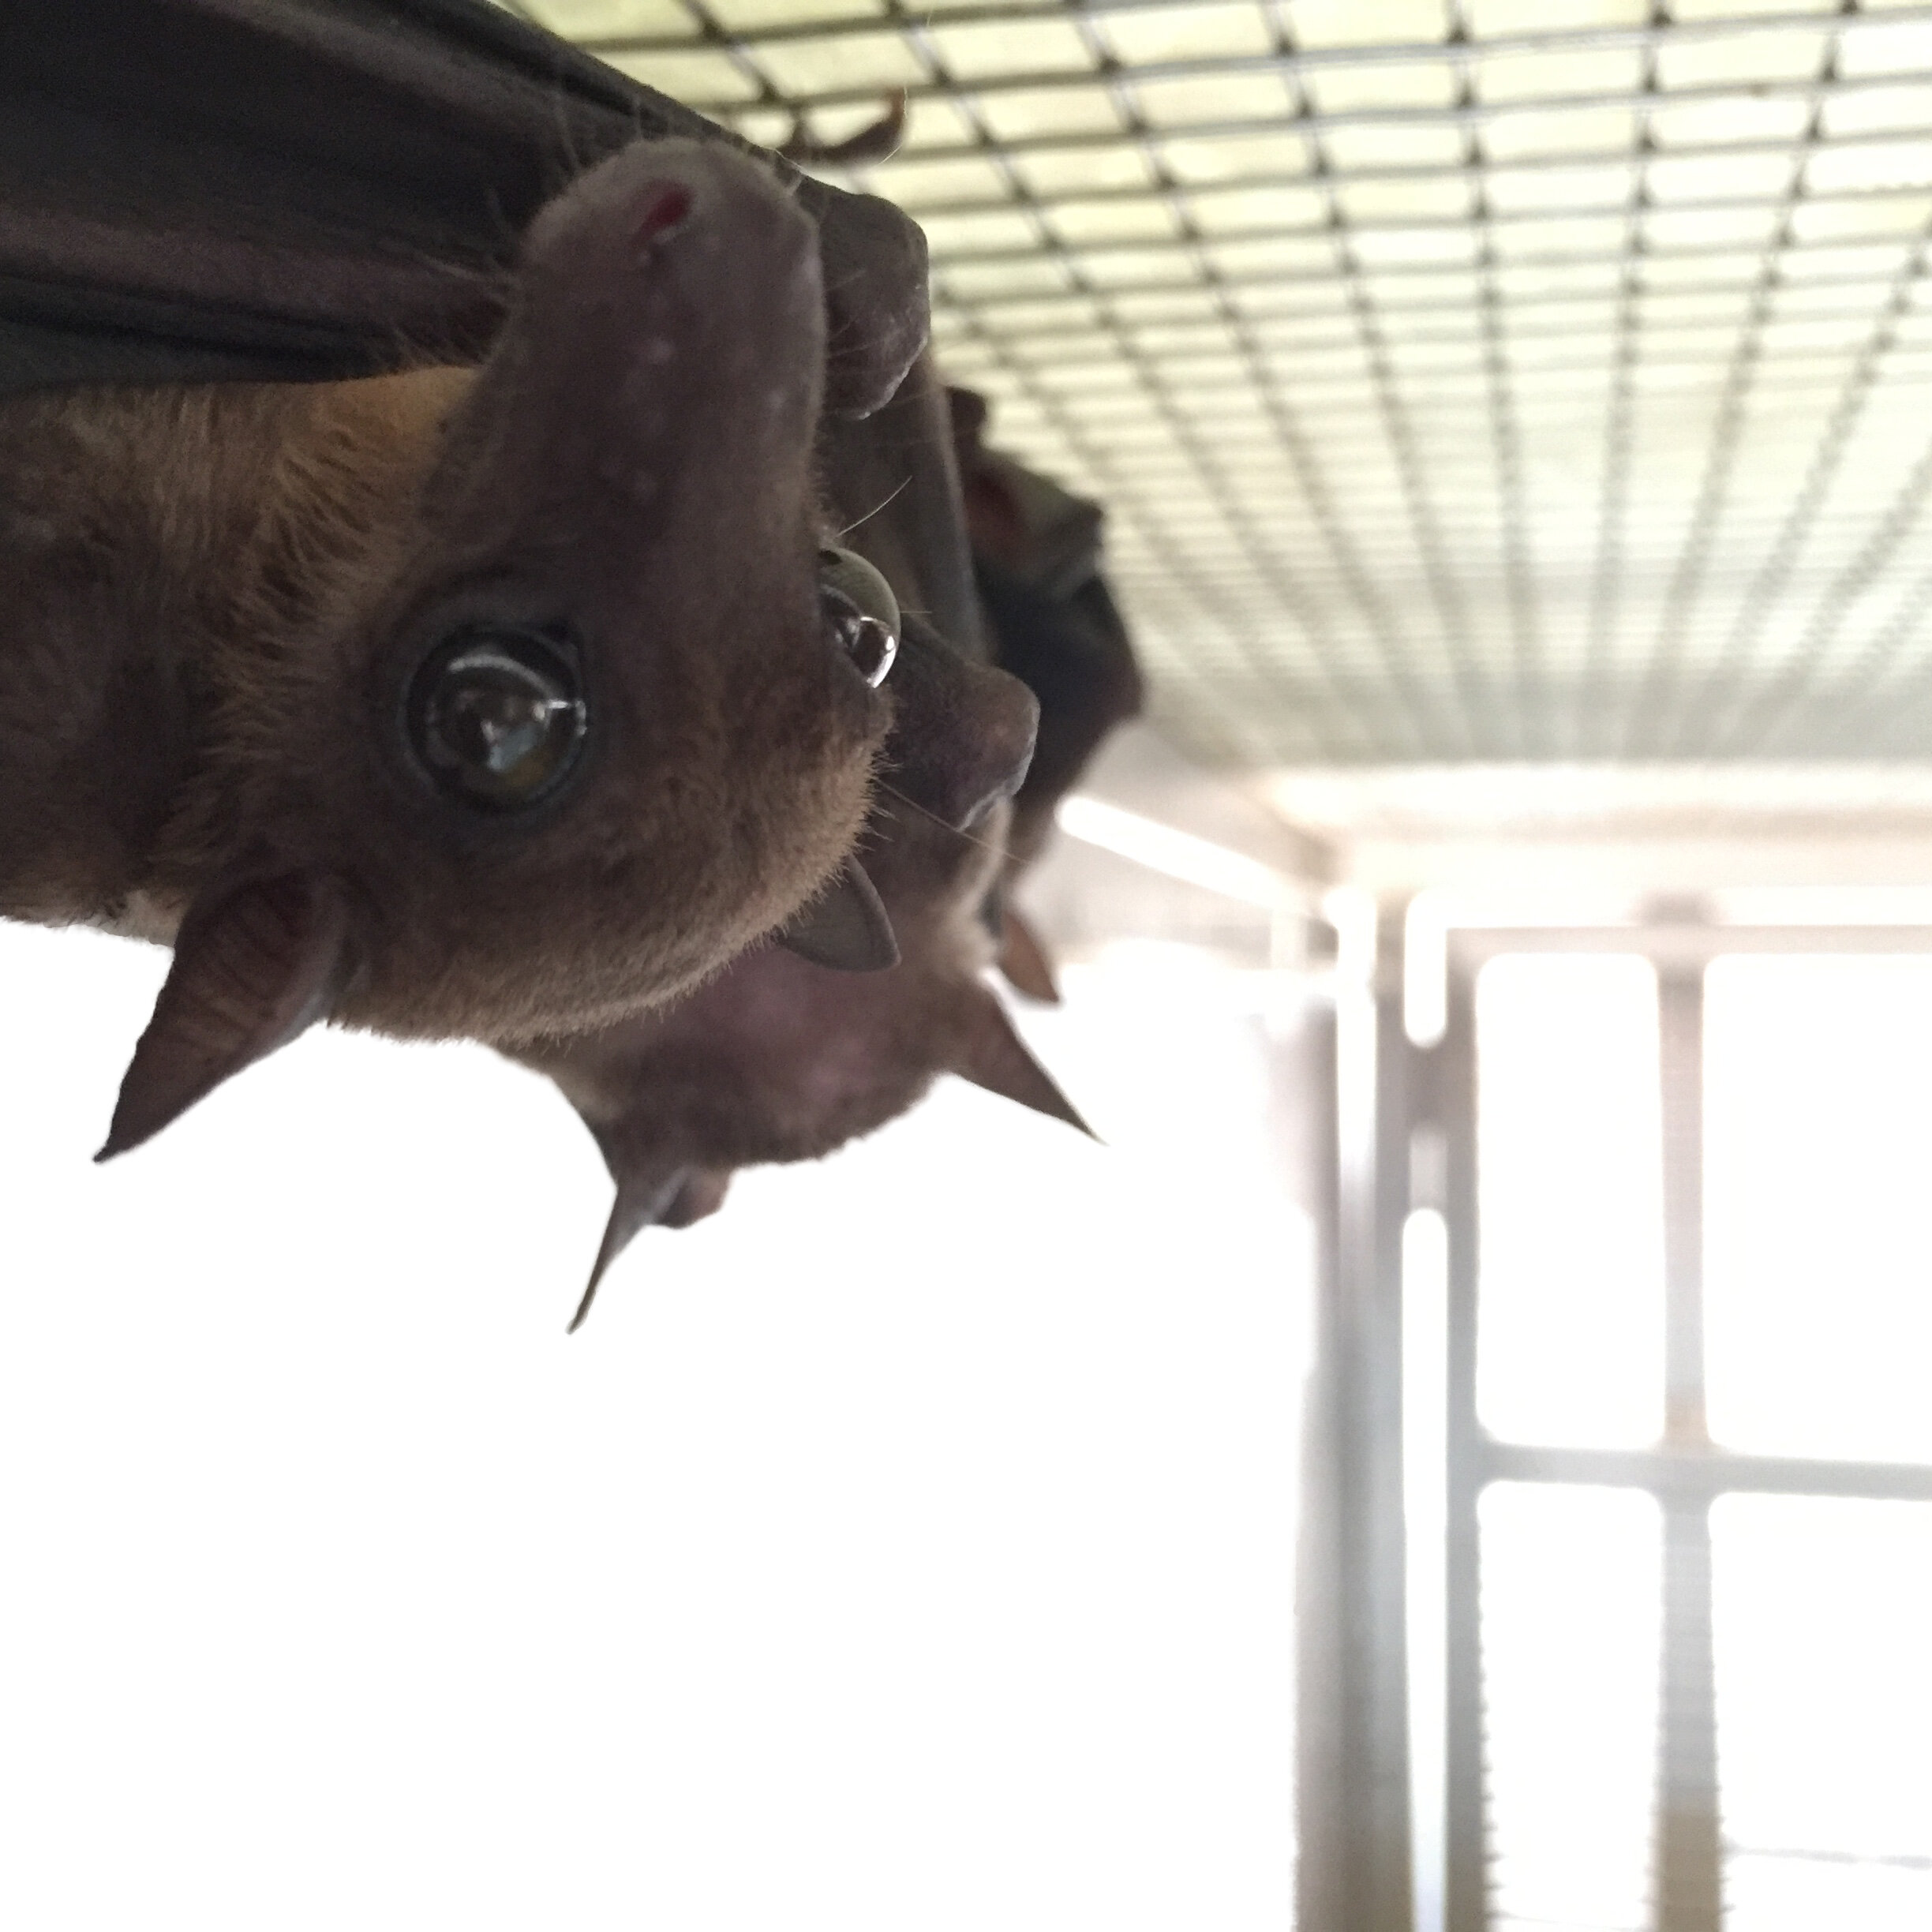 Scientists reveal first close-up look at bats’ immune response to live infection